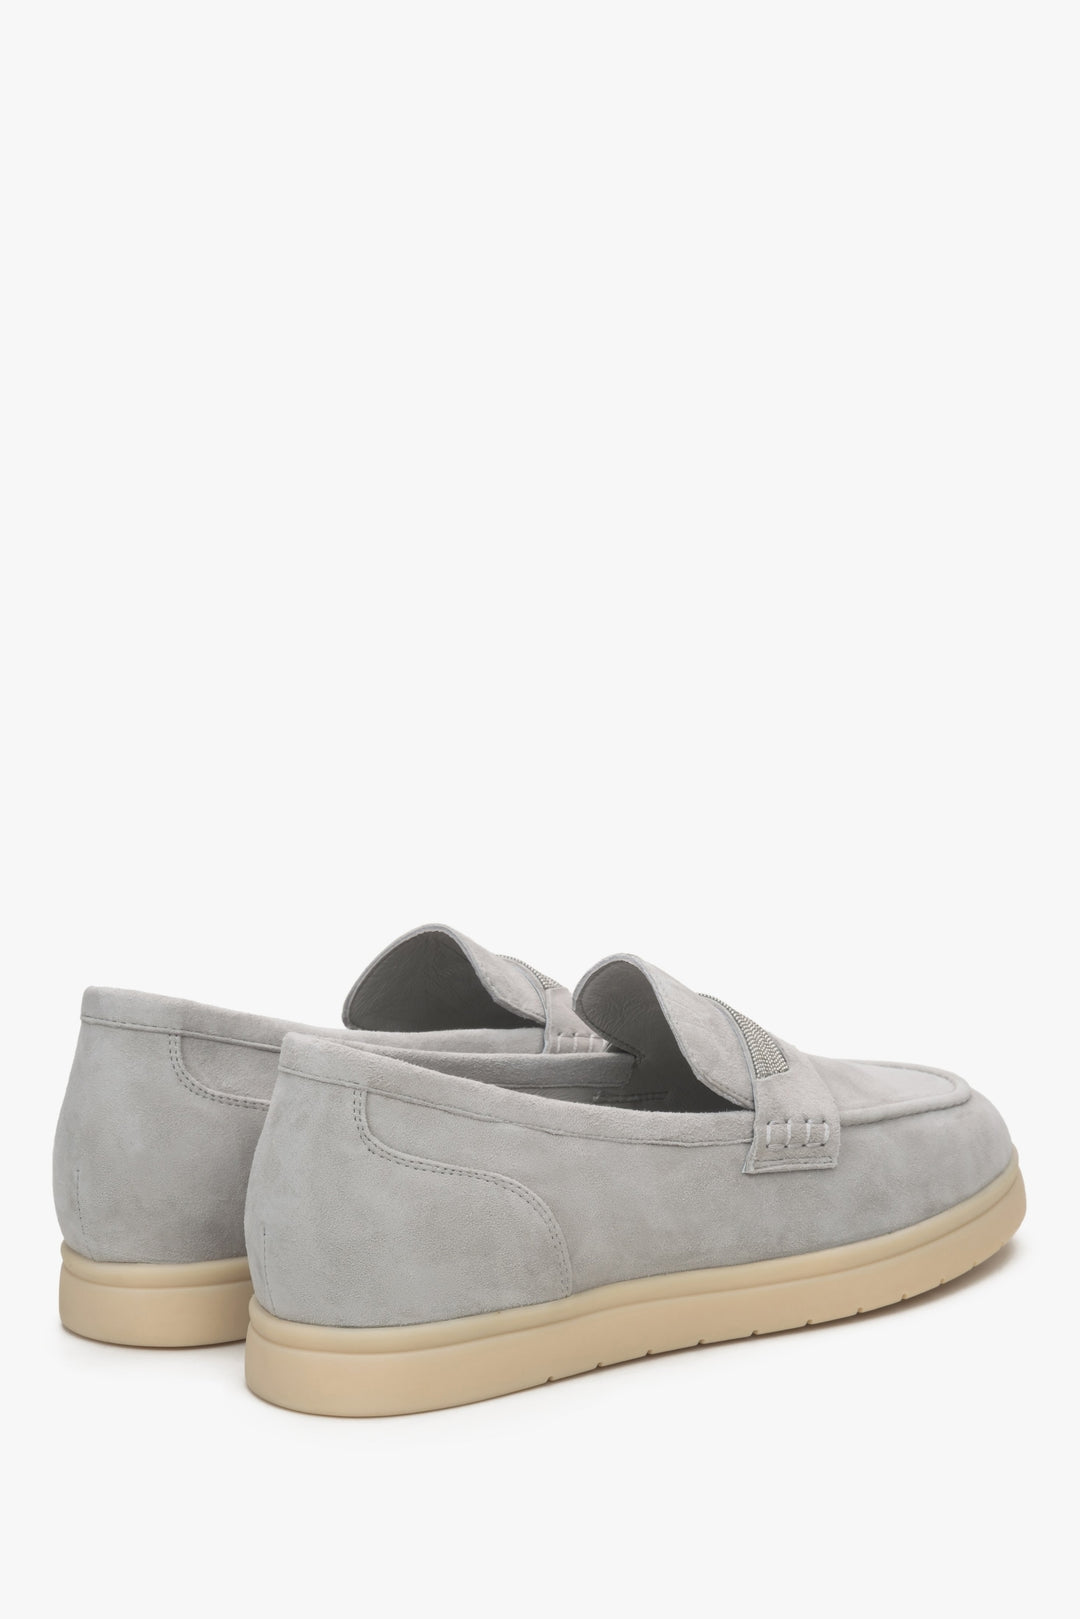 Women's grey velour moccasins by Estro - close-up on the heel.